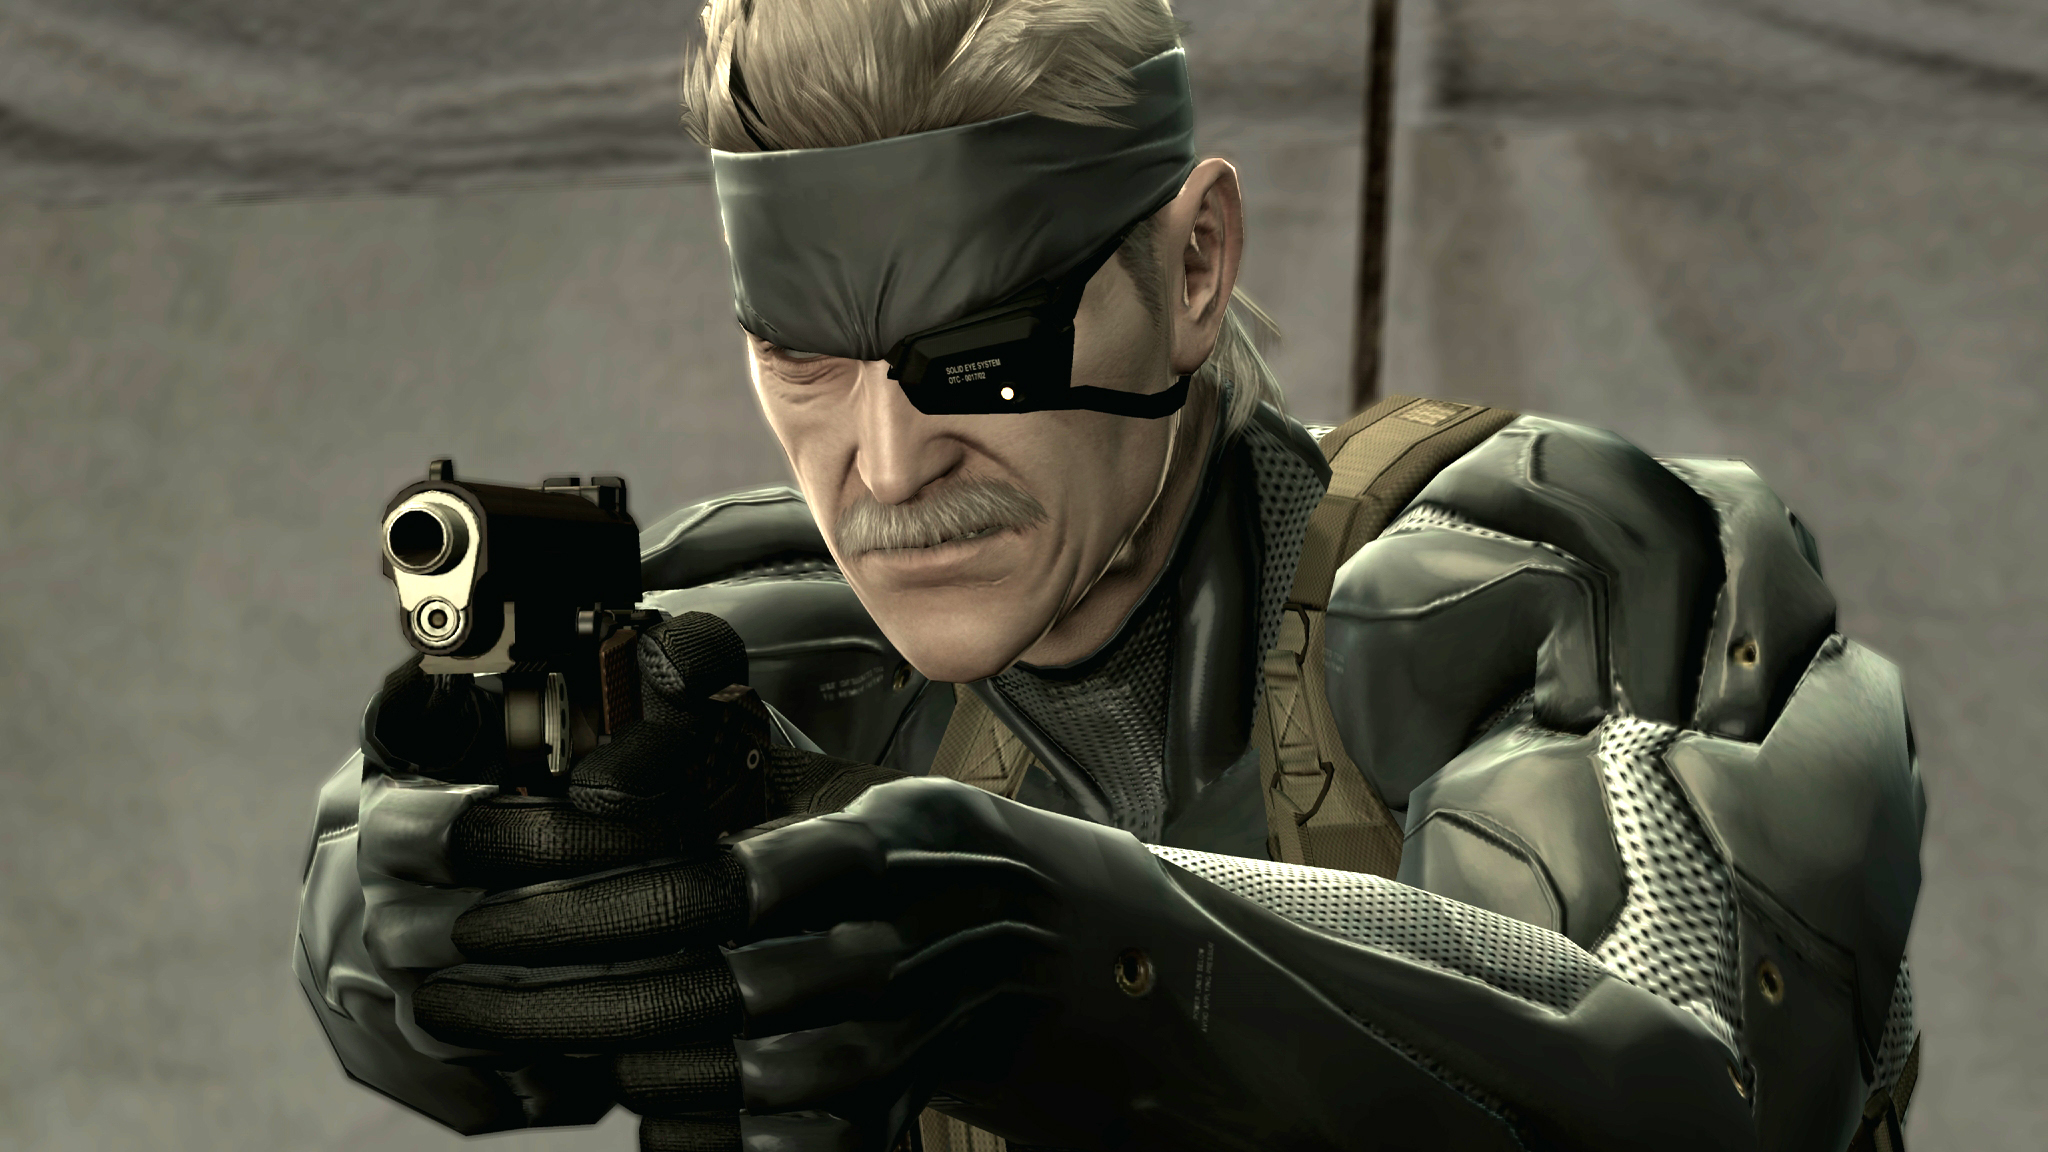 Metal Gear Solid 4 is 14 years old today, with the last physical appearance  of Solid Snake in the franchise. All the next games involved different  protagonist. it's wild to think more